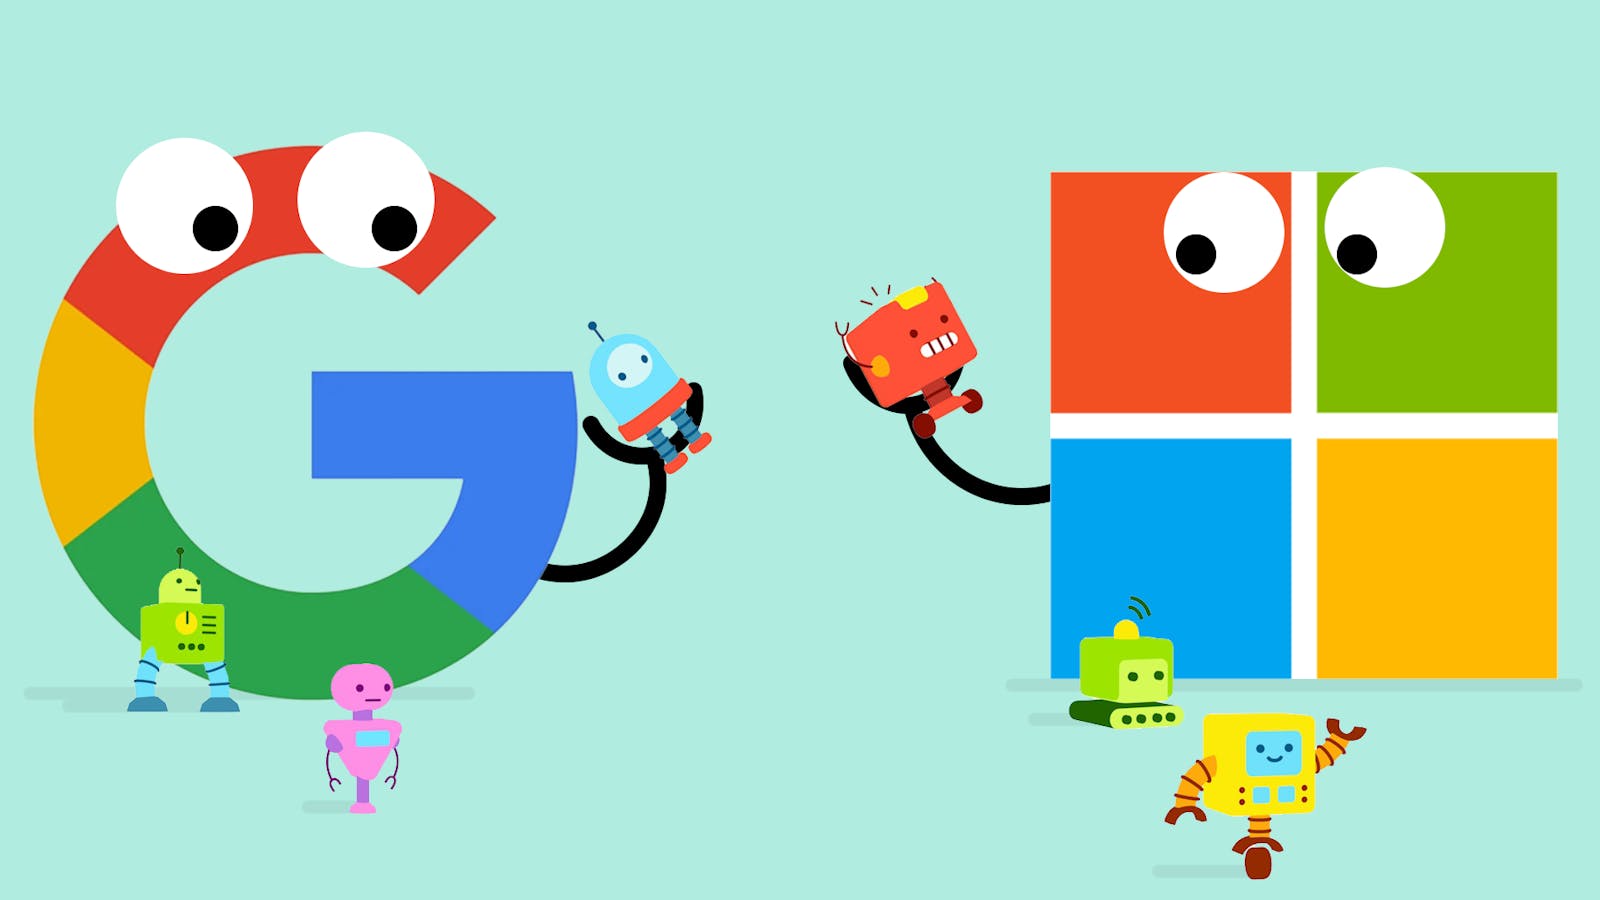 Google is reportedly testing a product to play games via